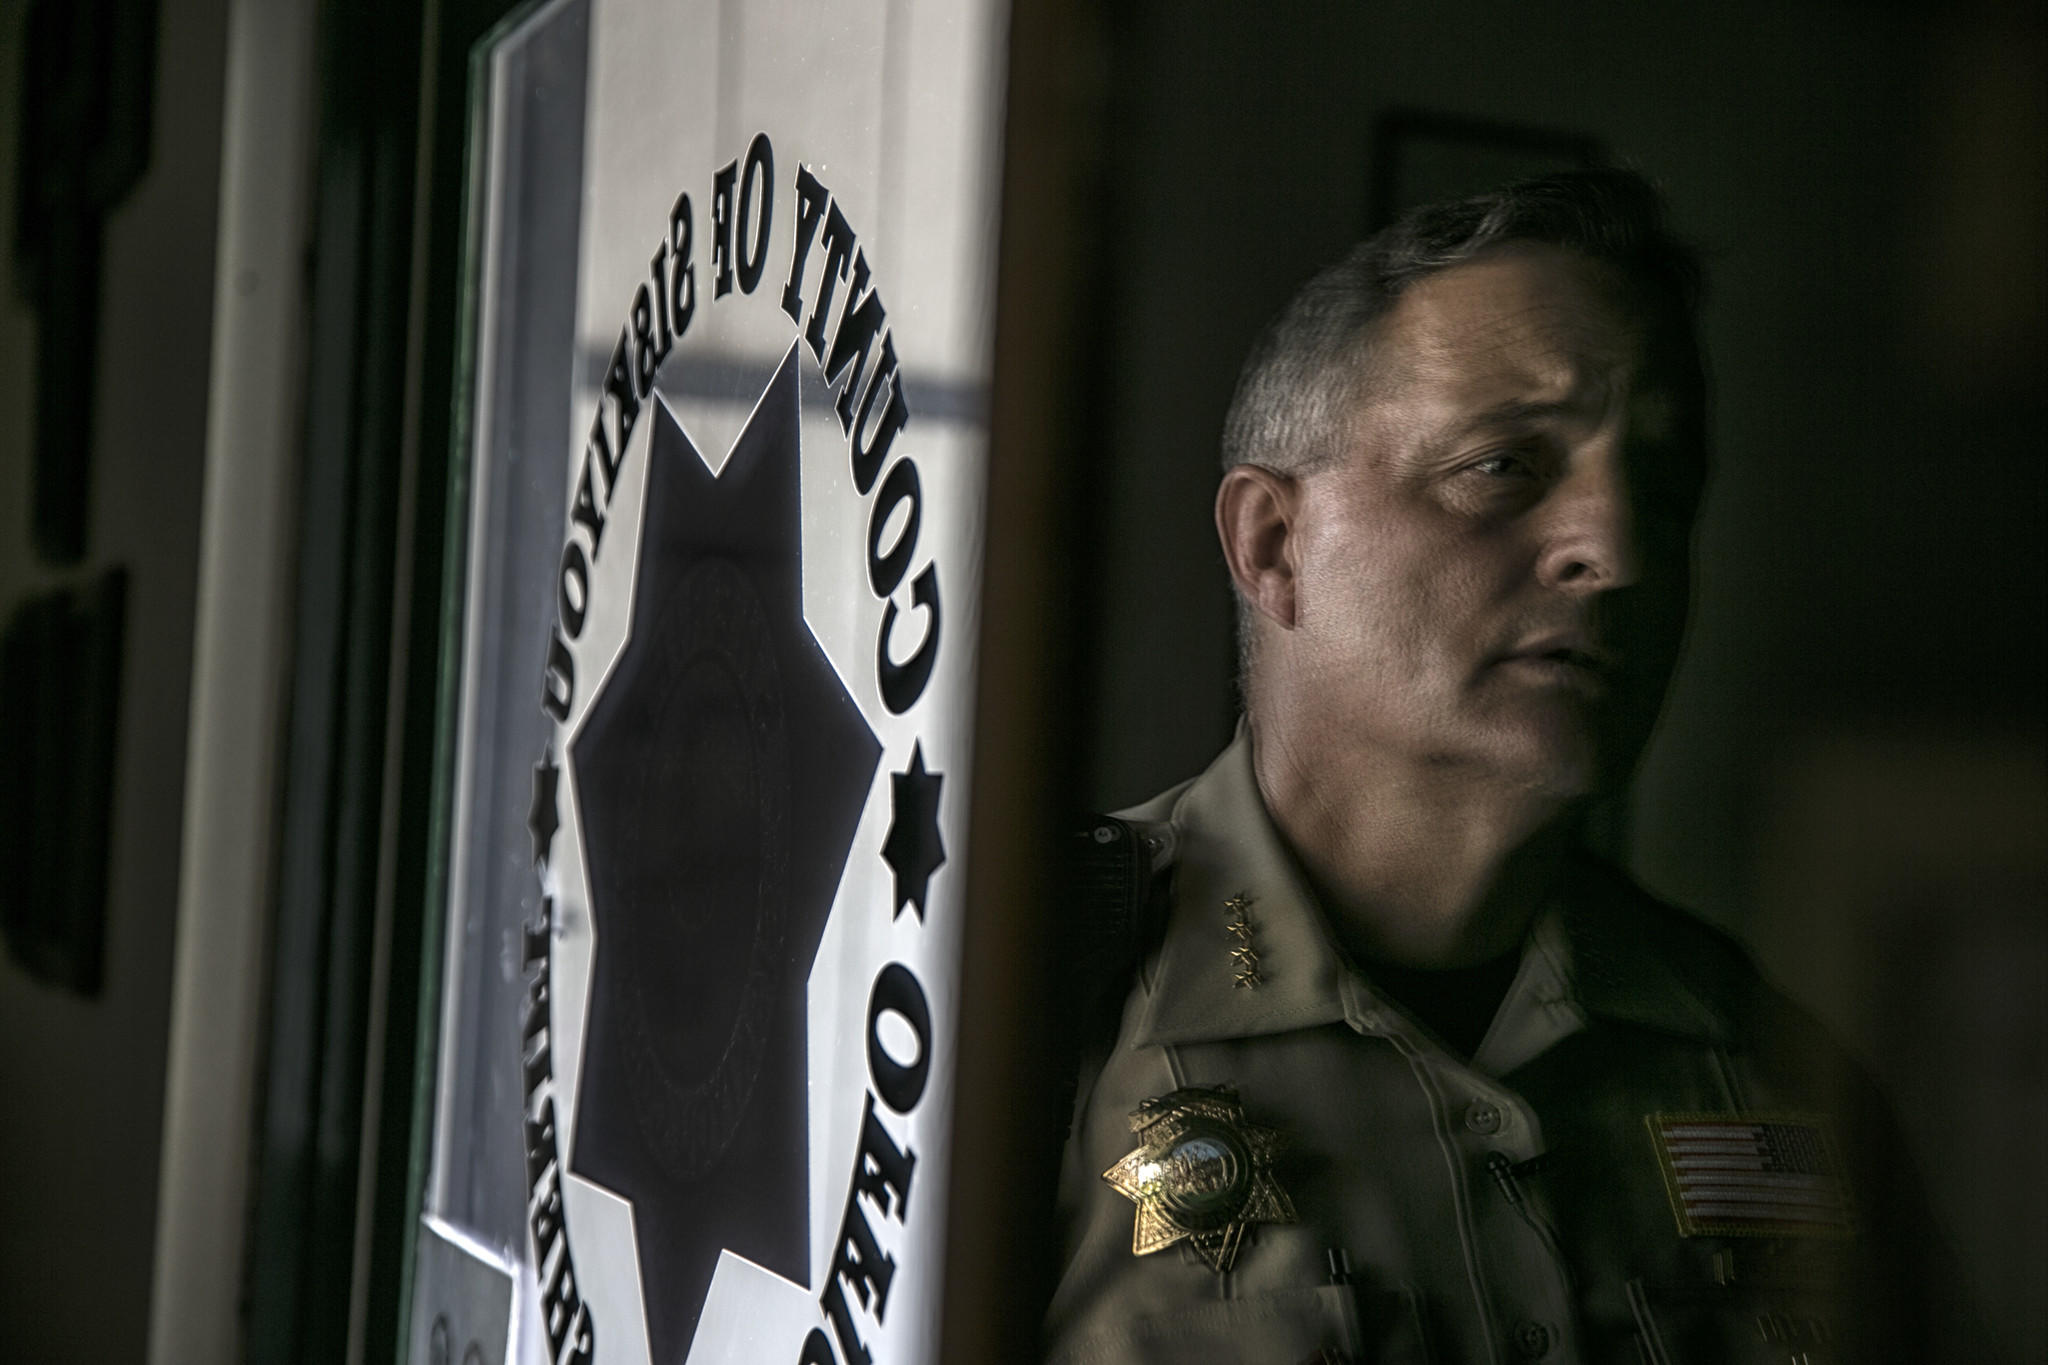 Sheriff John Lopey runs a department that patrols the vast area of Siskiyou County near the Oregon border and Mt. Shasta.